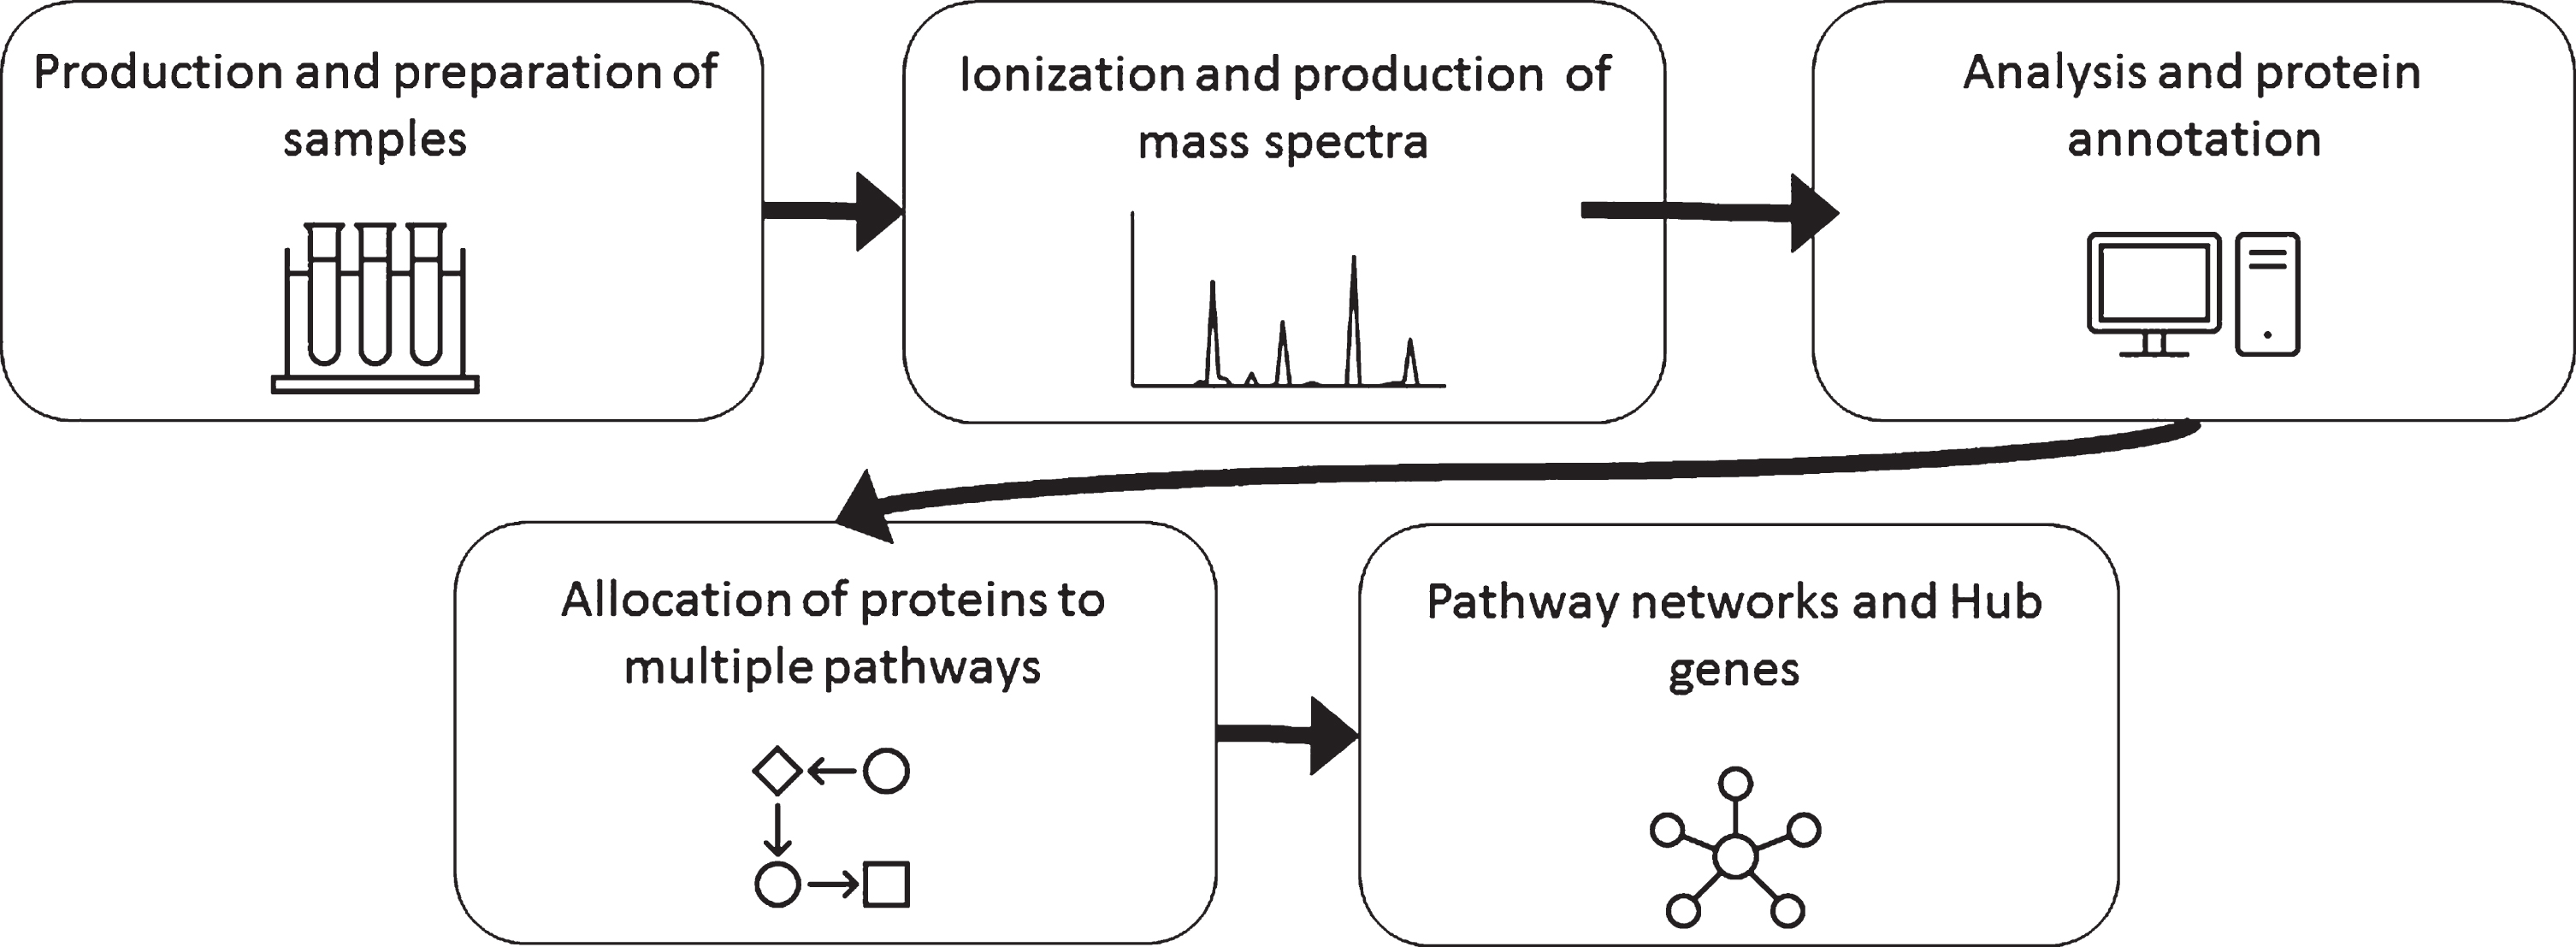 General workflow for mass spectrometry analysis of proteins.